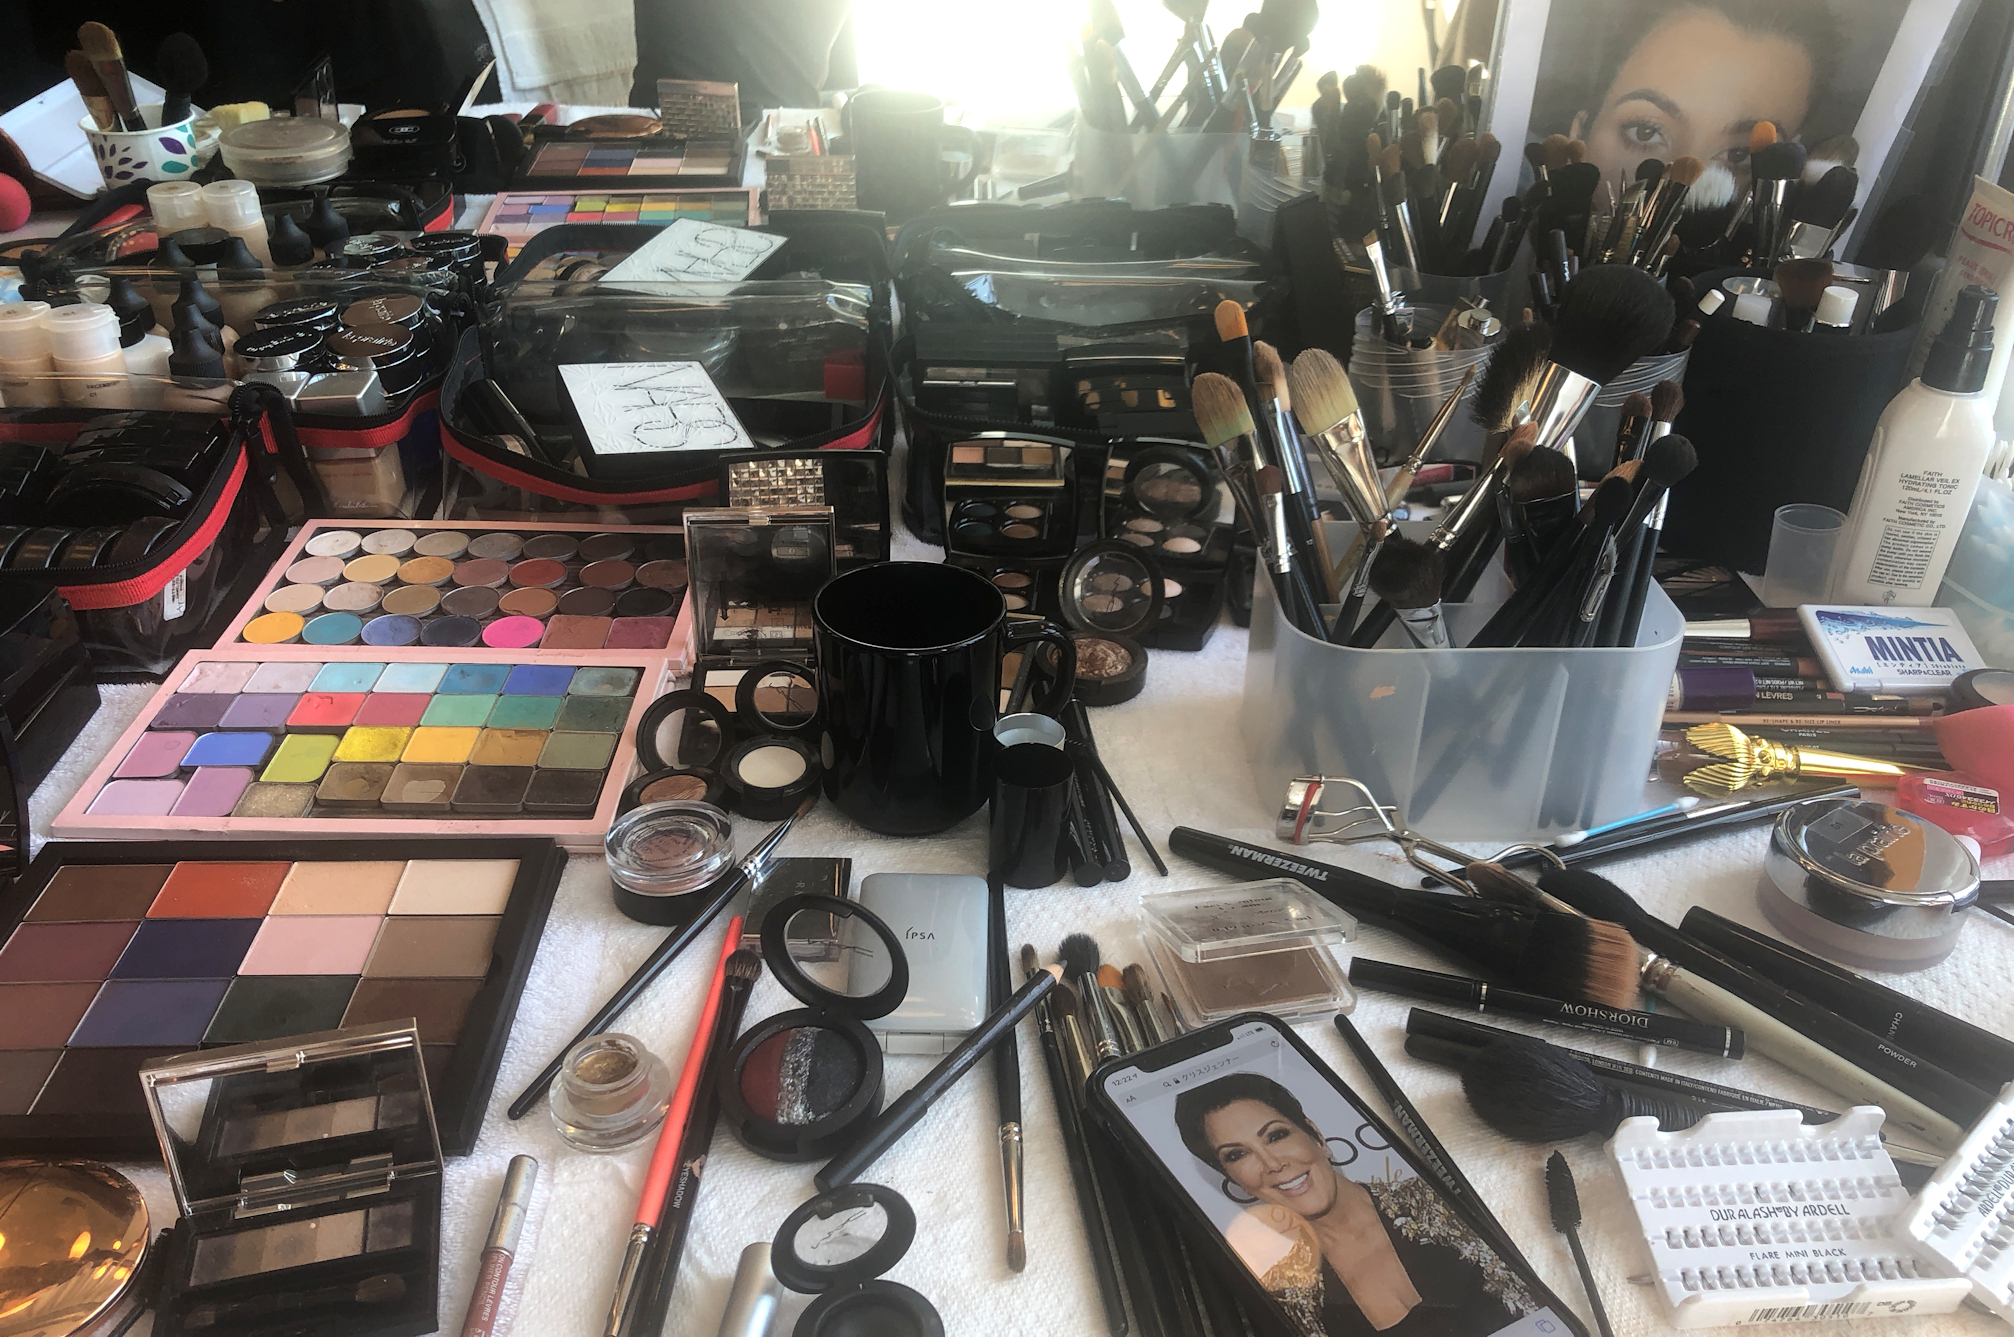 Karen's Quirky Style - Face photo shoot - the makeup table